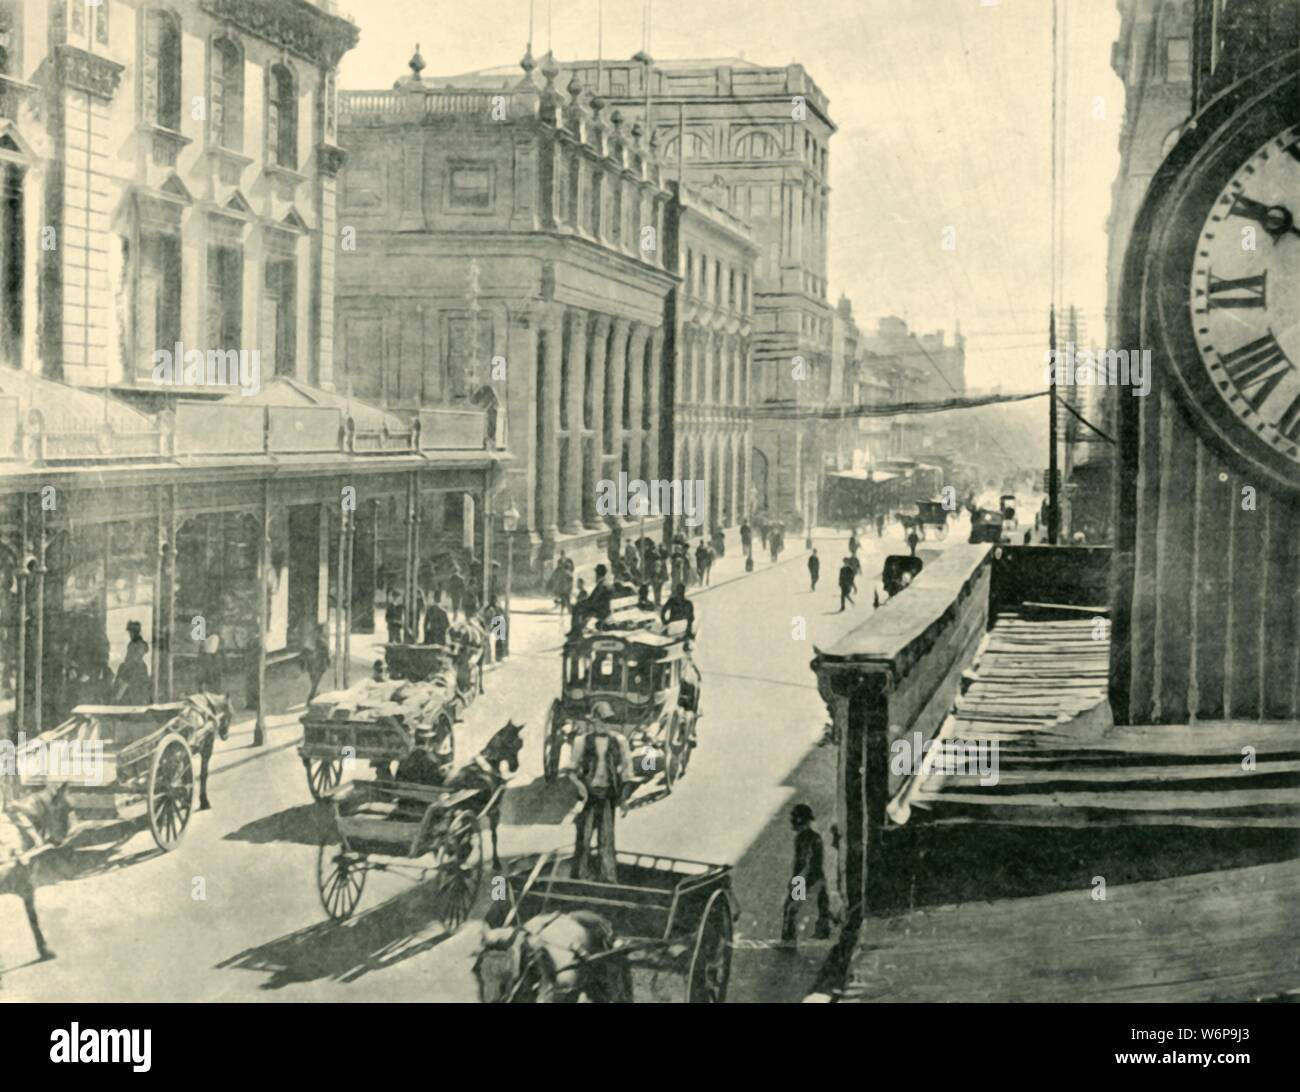 'George Street, Sydney', 1901. Sydney's original high street, formally named after King George III  by Governor Lachlan Macquarie in 1810. From &quot;Federated Australia&quot;. [The Werner Company, London, 1901] Stock Photo